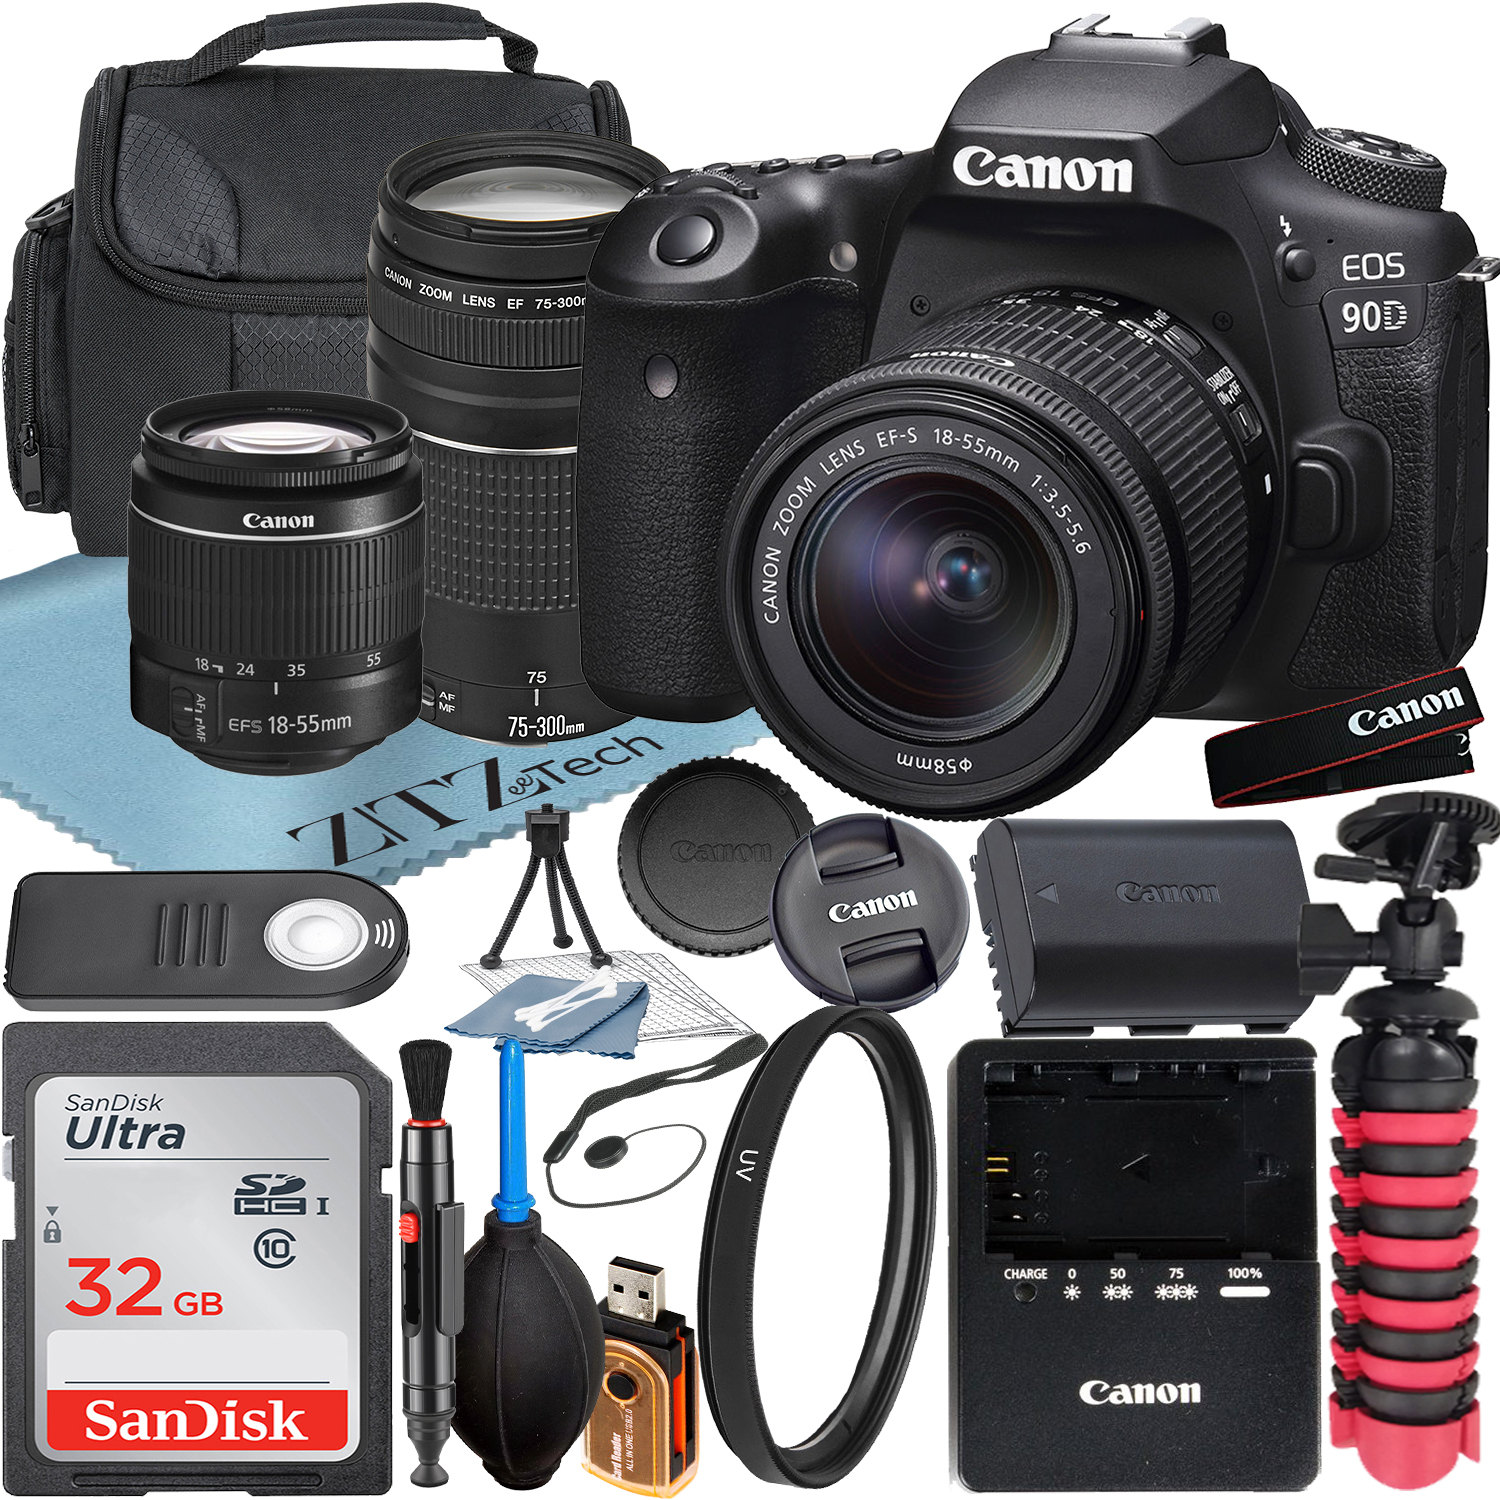 Canon EOS 90D DSLR Camera with 18-55mm + 75-300mm Lens + SanDisk 32GB Memory Card + Case + UV Filter + ZeeTech Accessory Bundle